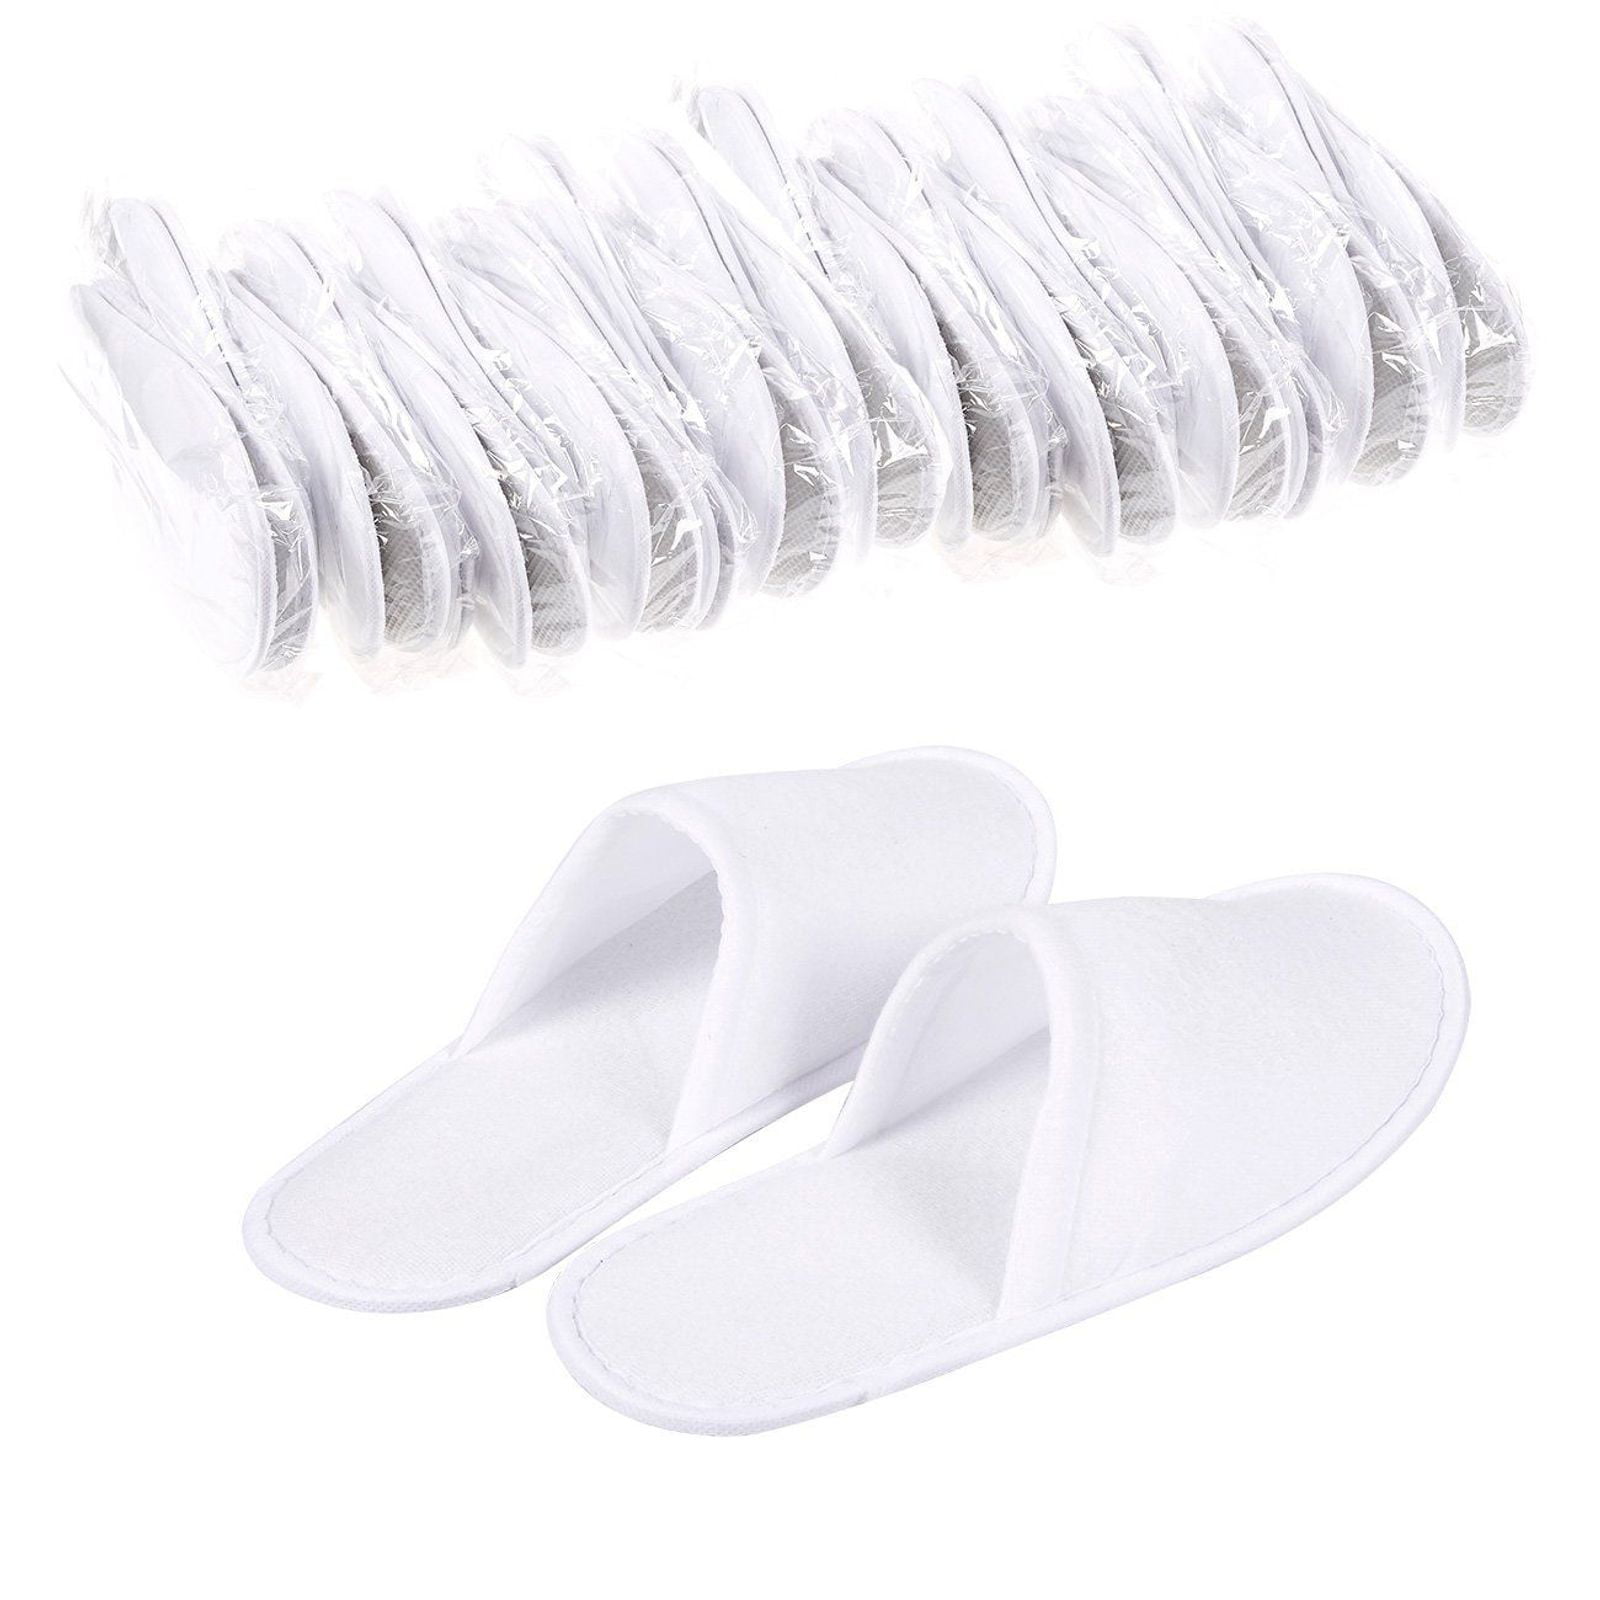 echoapple 5 Pairs of Waffle Open Toe White Spa Slippers-Two Size Fit Most Men and Women for Spa Hotel and Travel Party Guest